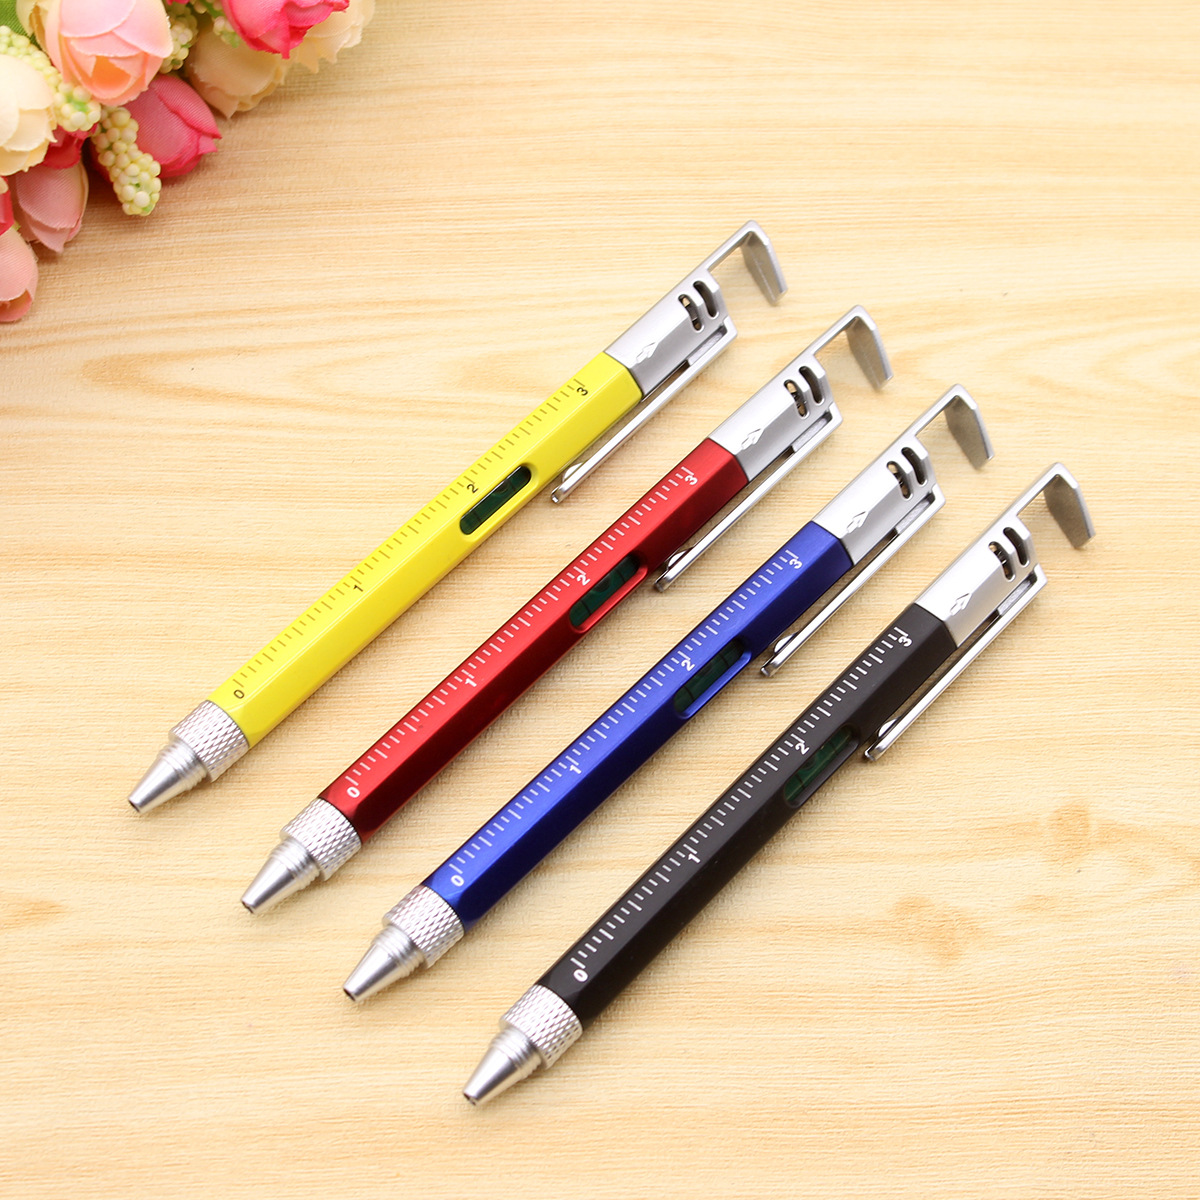 7 in 1 multi functional plasticTool Pen with Ruler,level,Stylus and Screwdrive  - 副本 - 副本